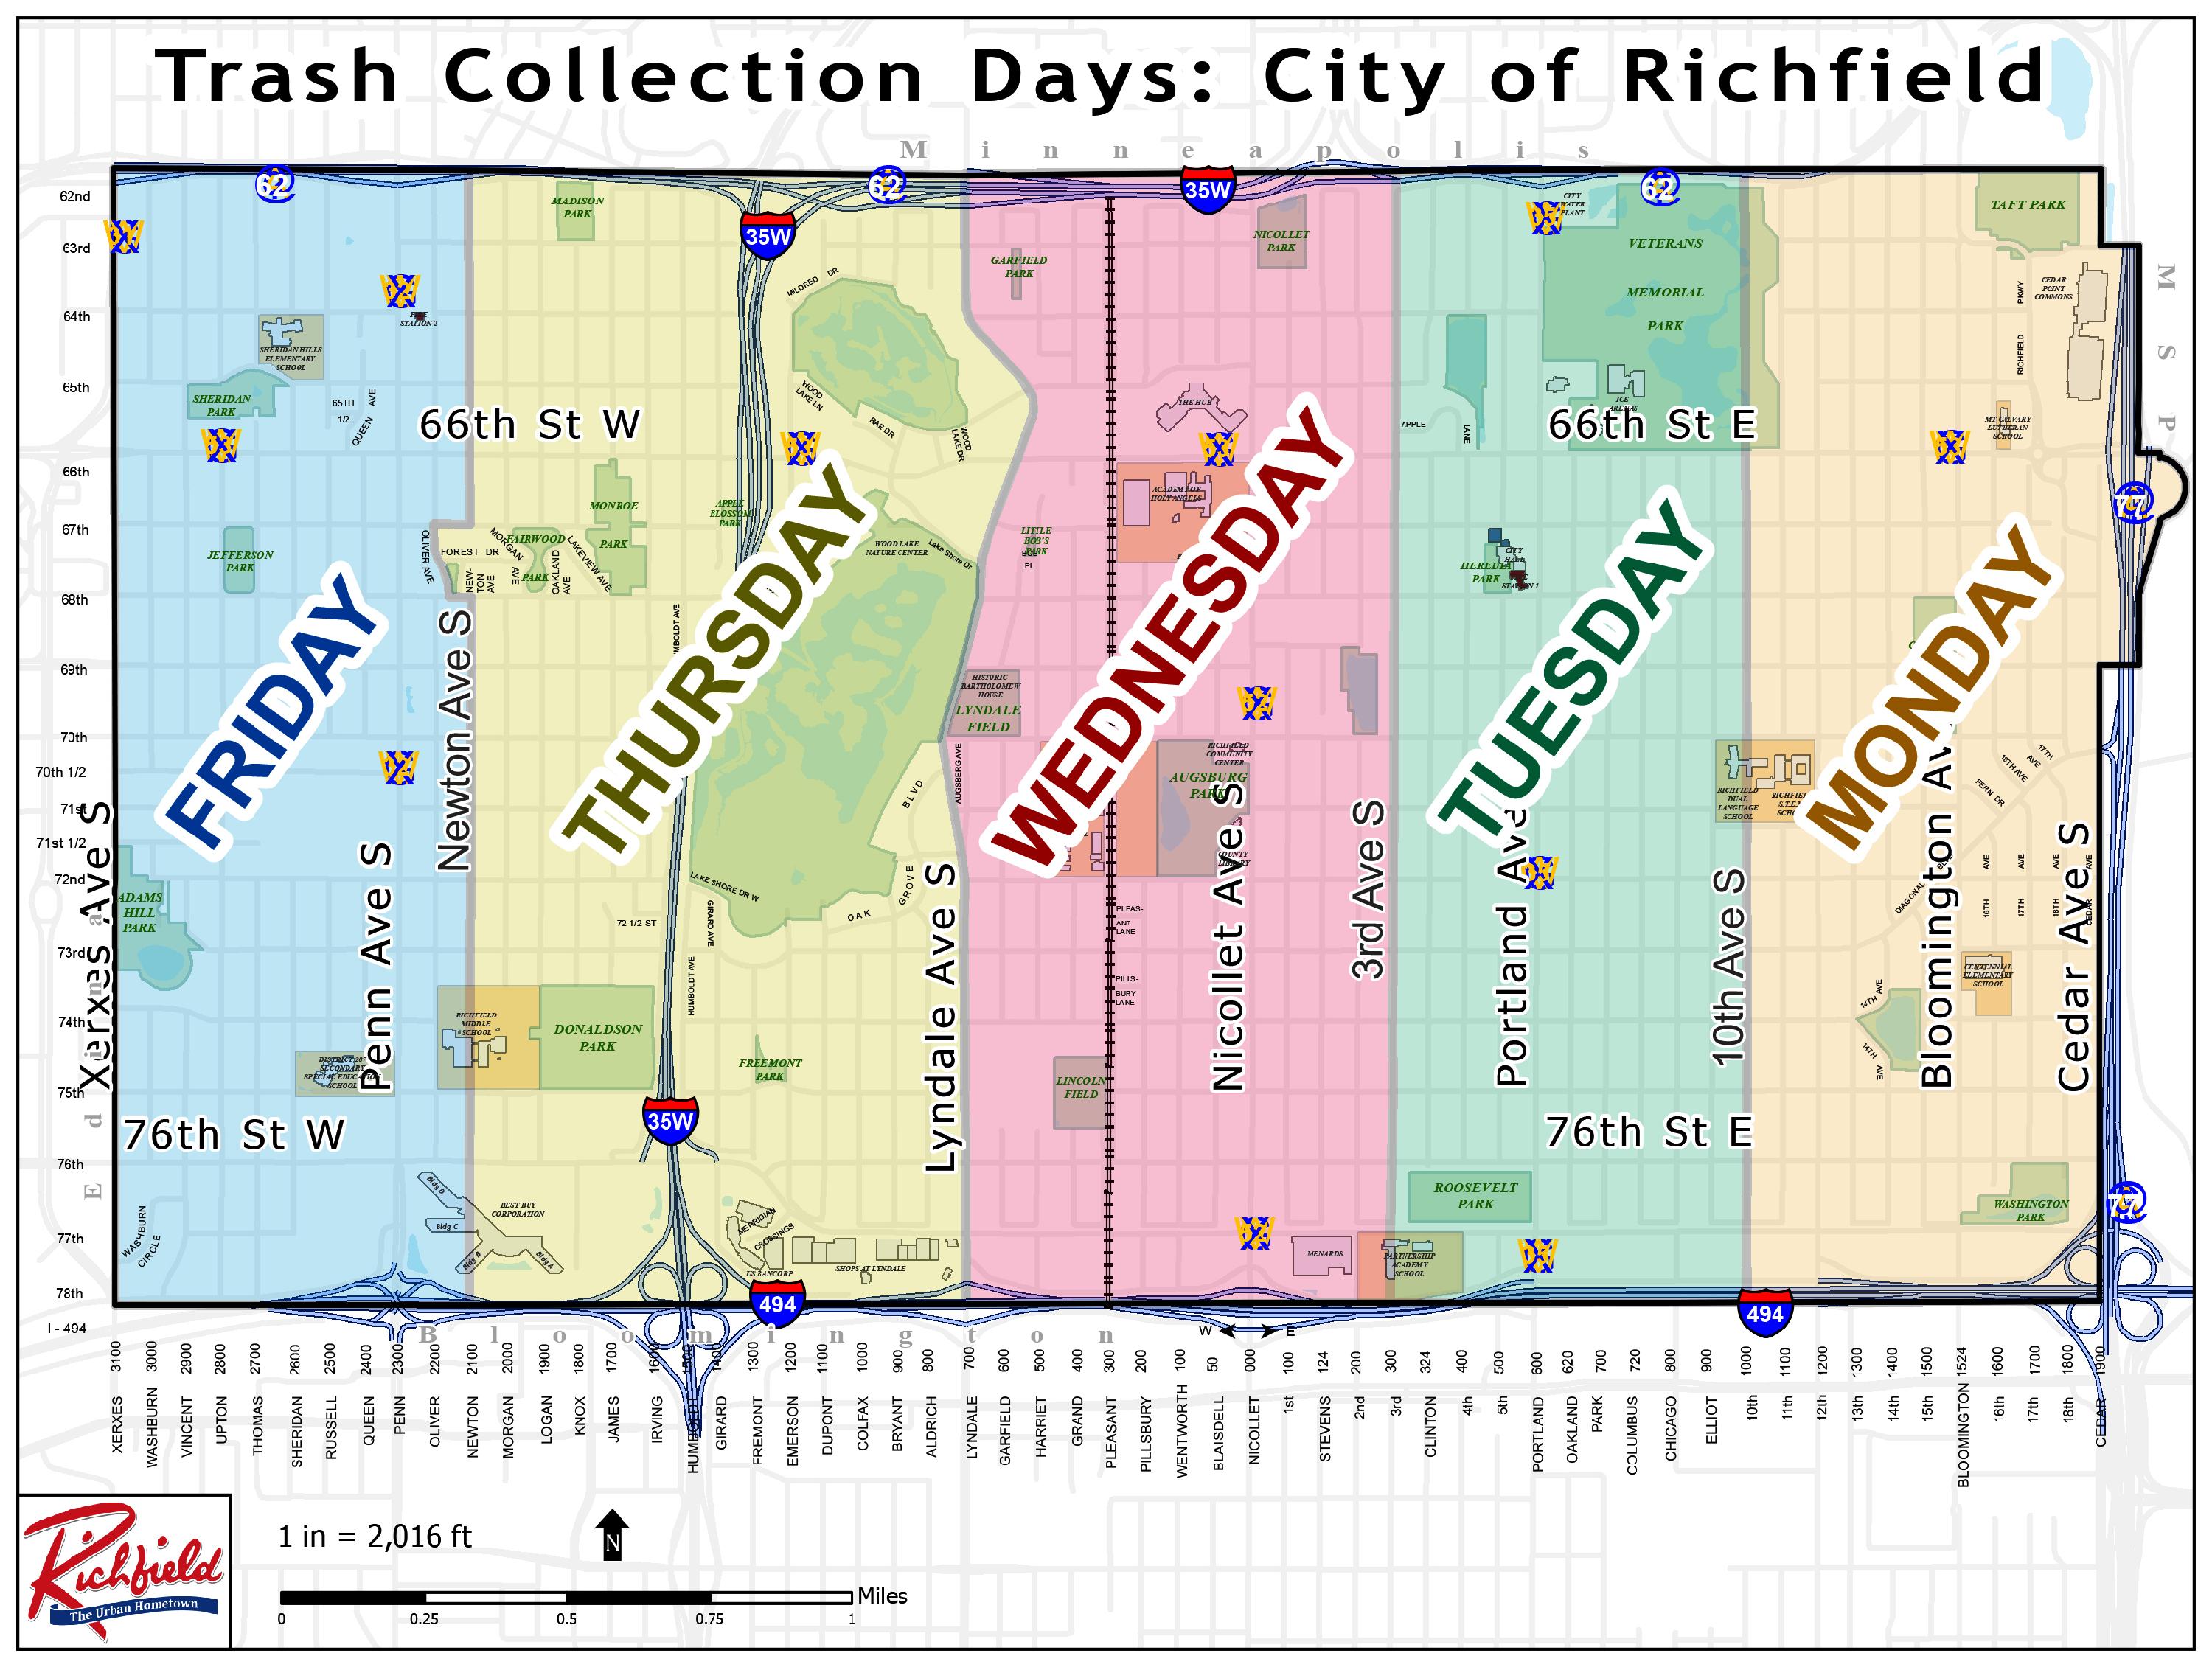 Trash Collection Days - NEW